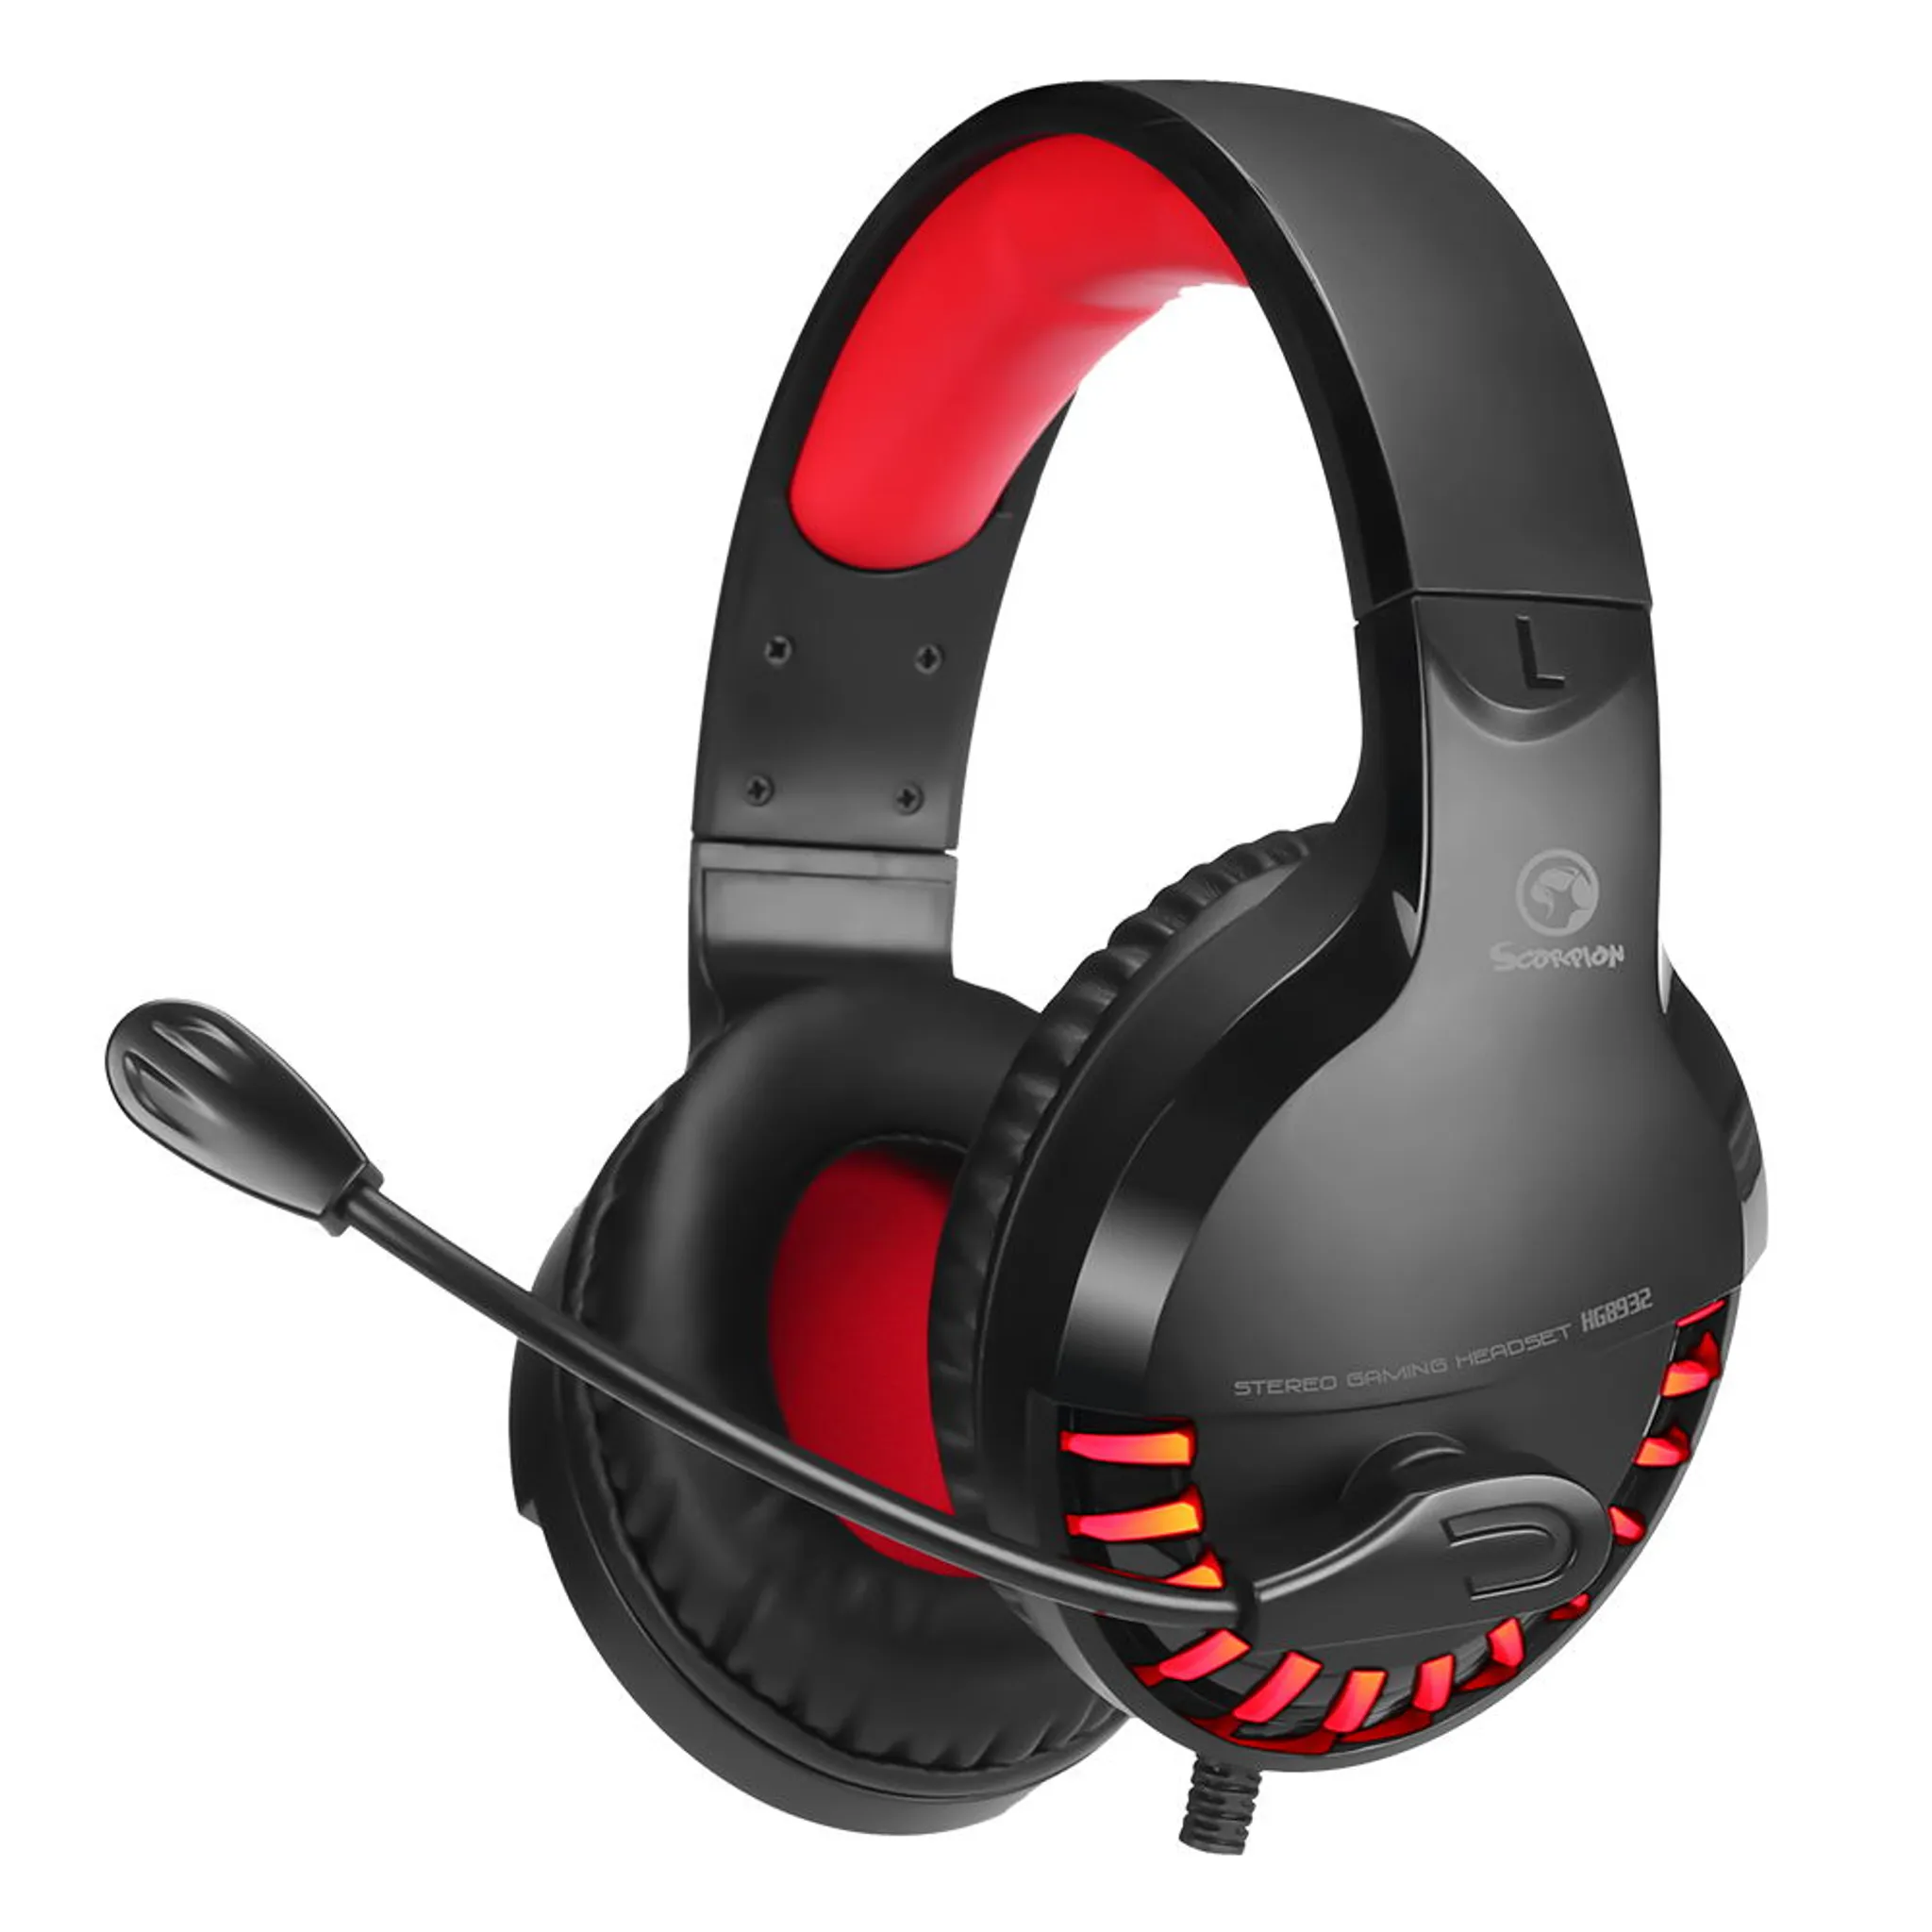 MARVO HG8932 Wired Gaming Headset,